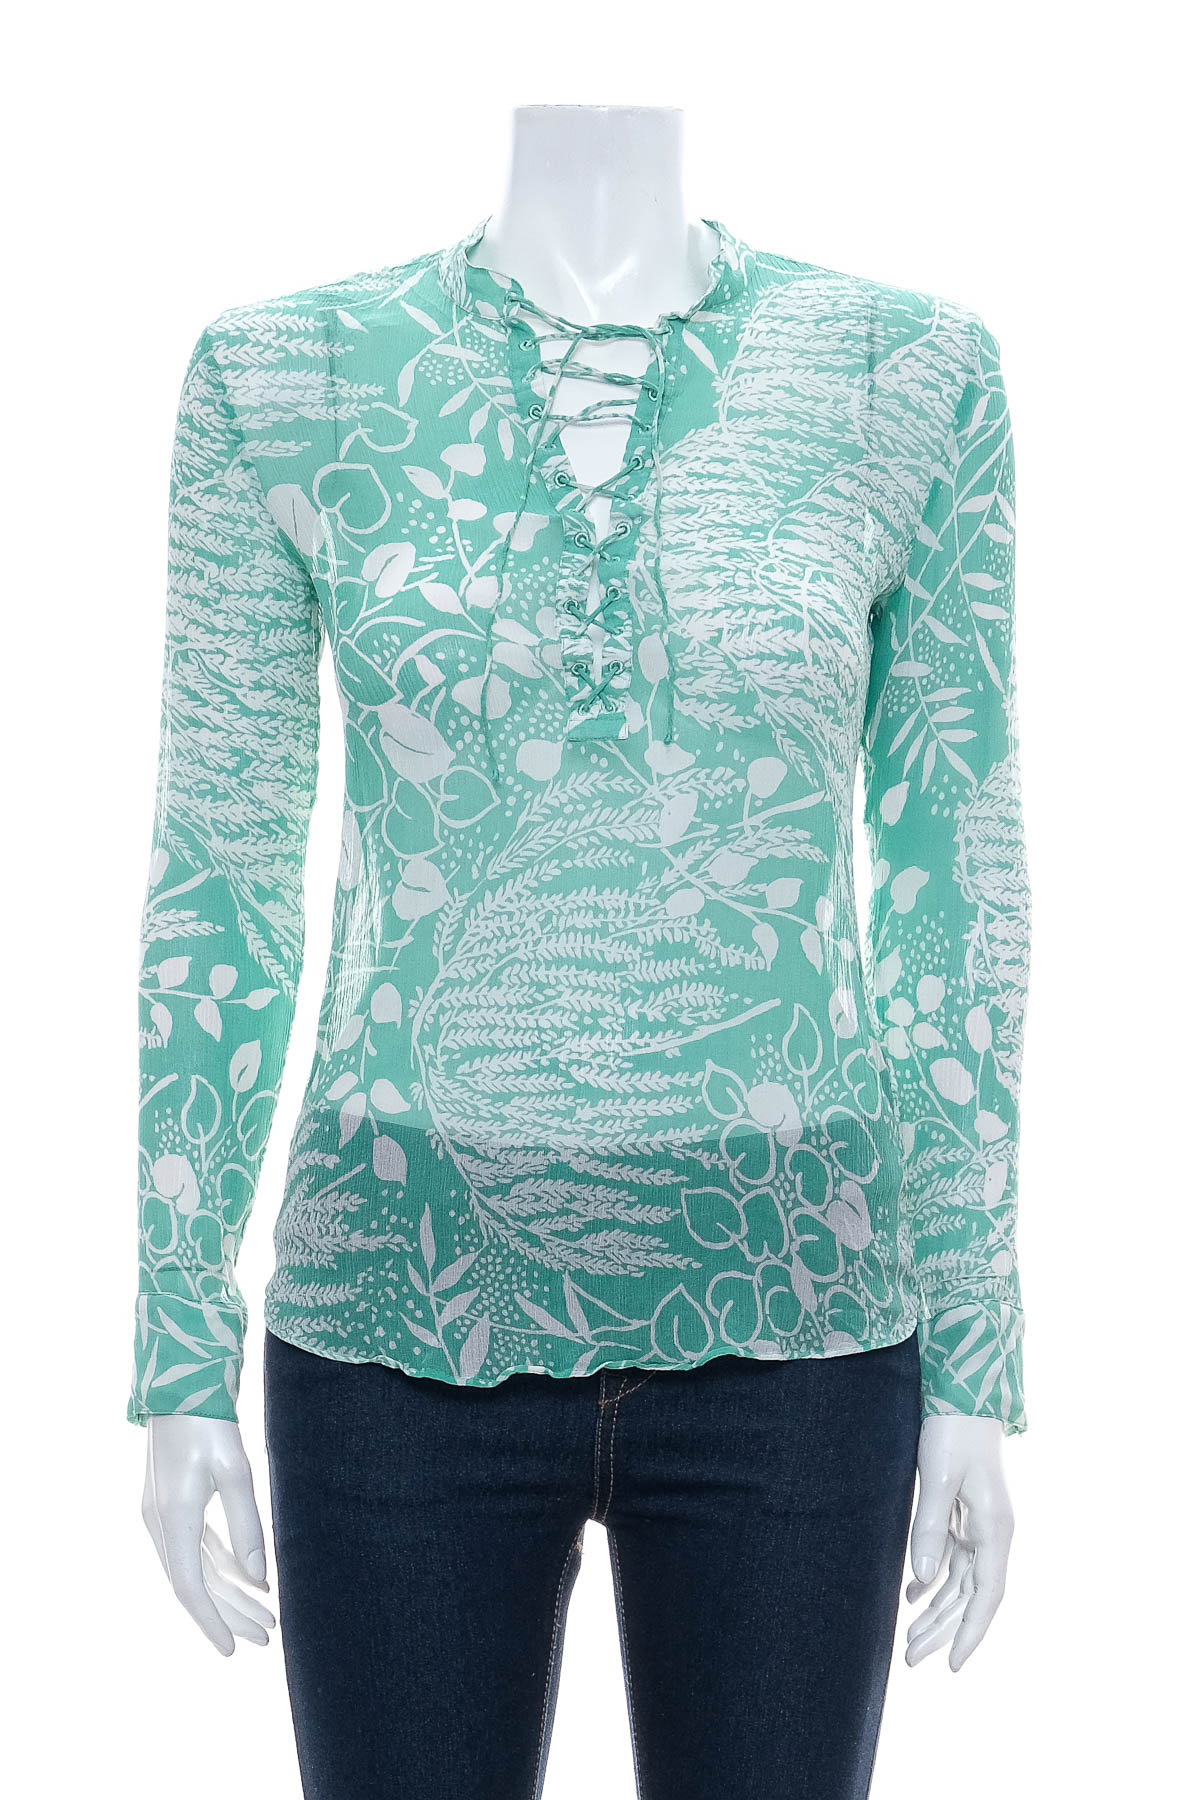 Women's shirt - H&M Spring Collection 2014 - 0